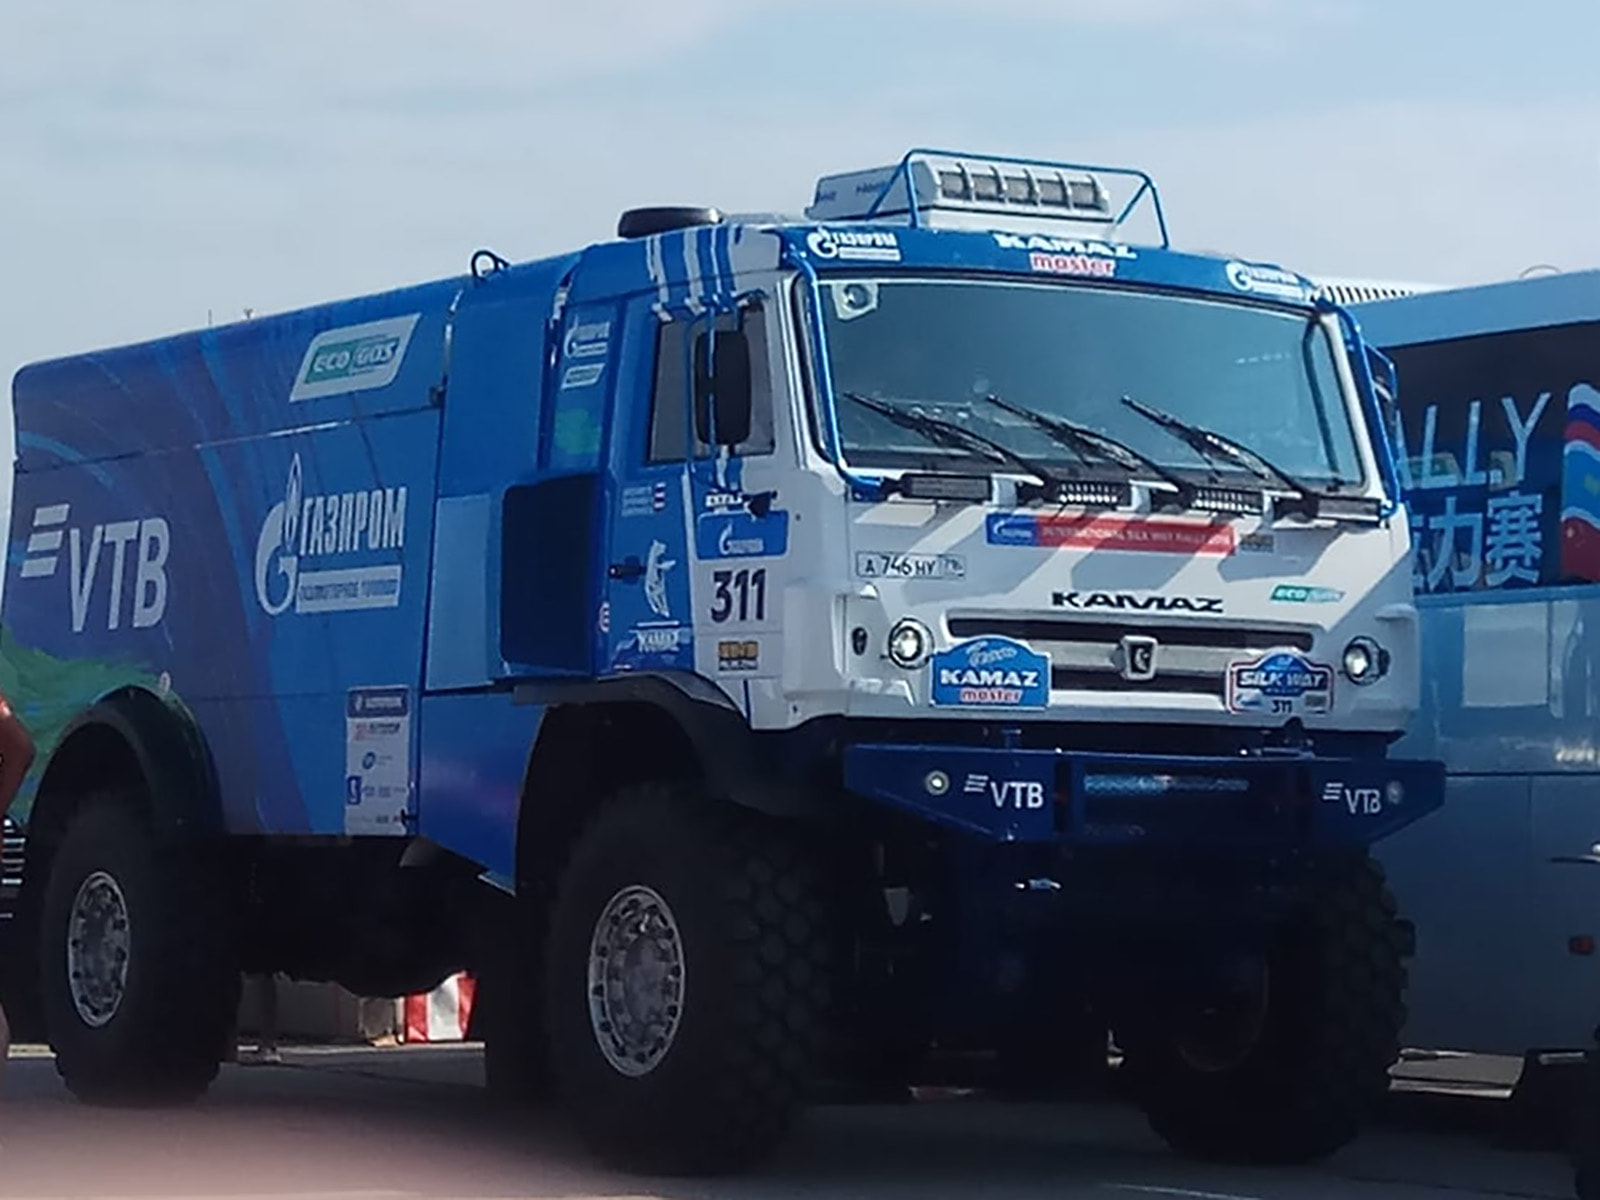 Gazprom Space Systems has provided satellite communication on the Silk Way Rally 2018 